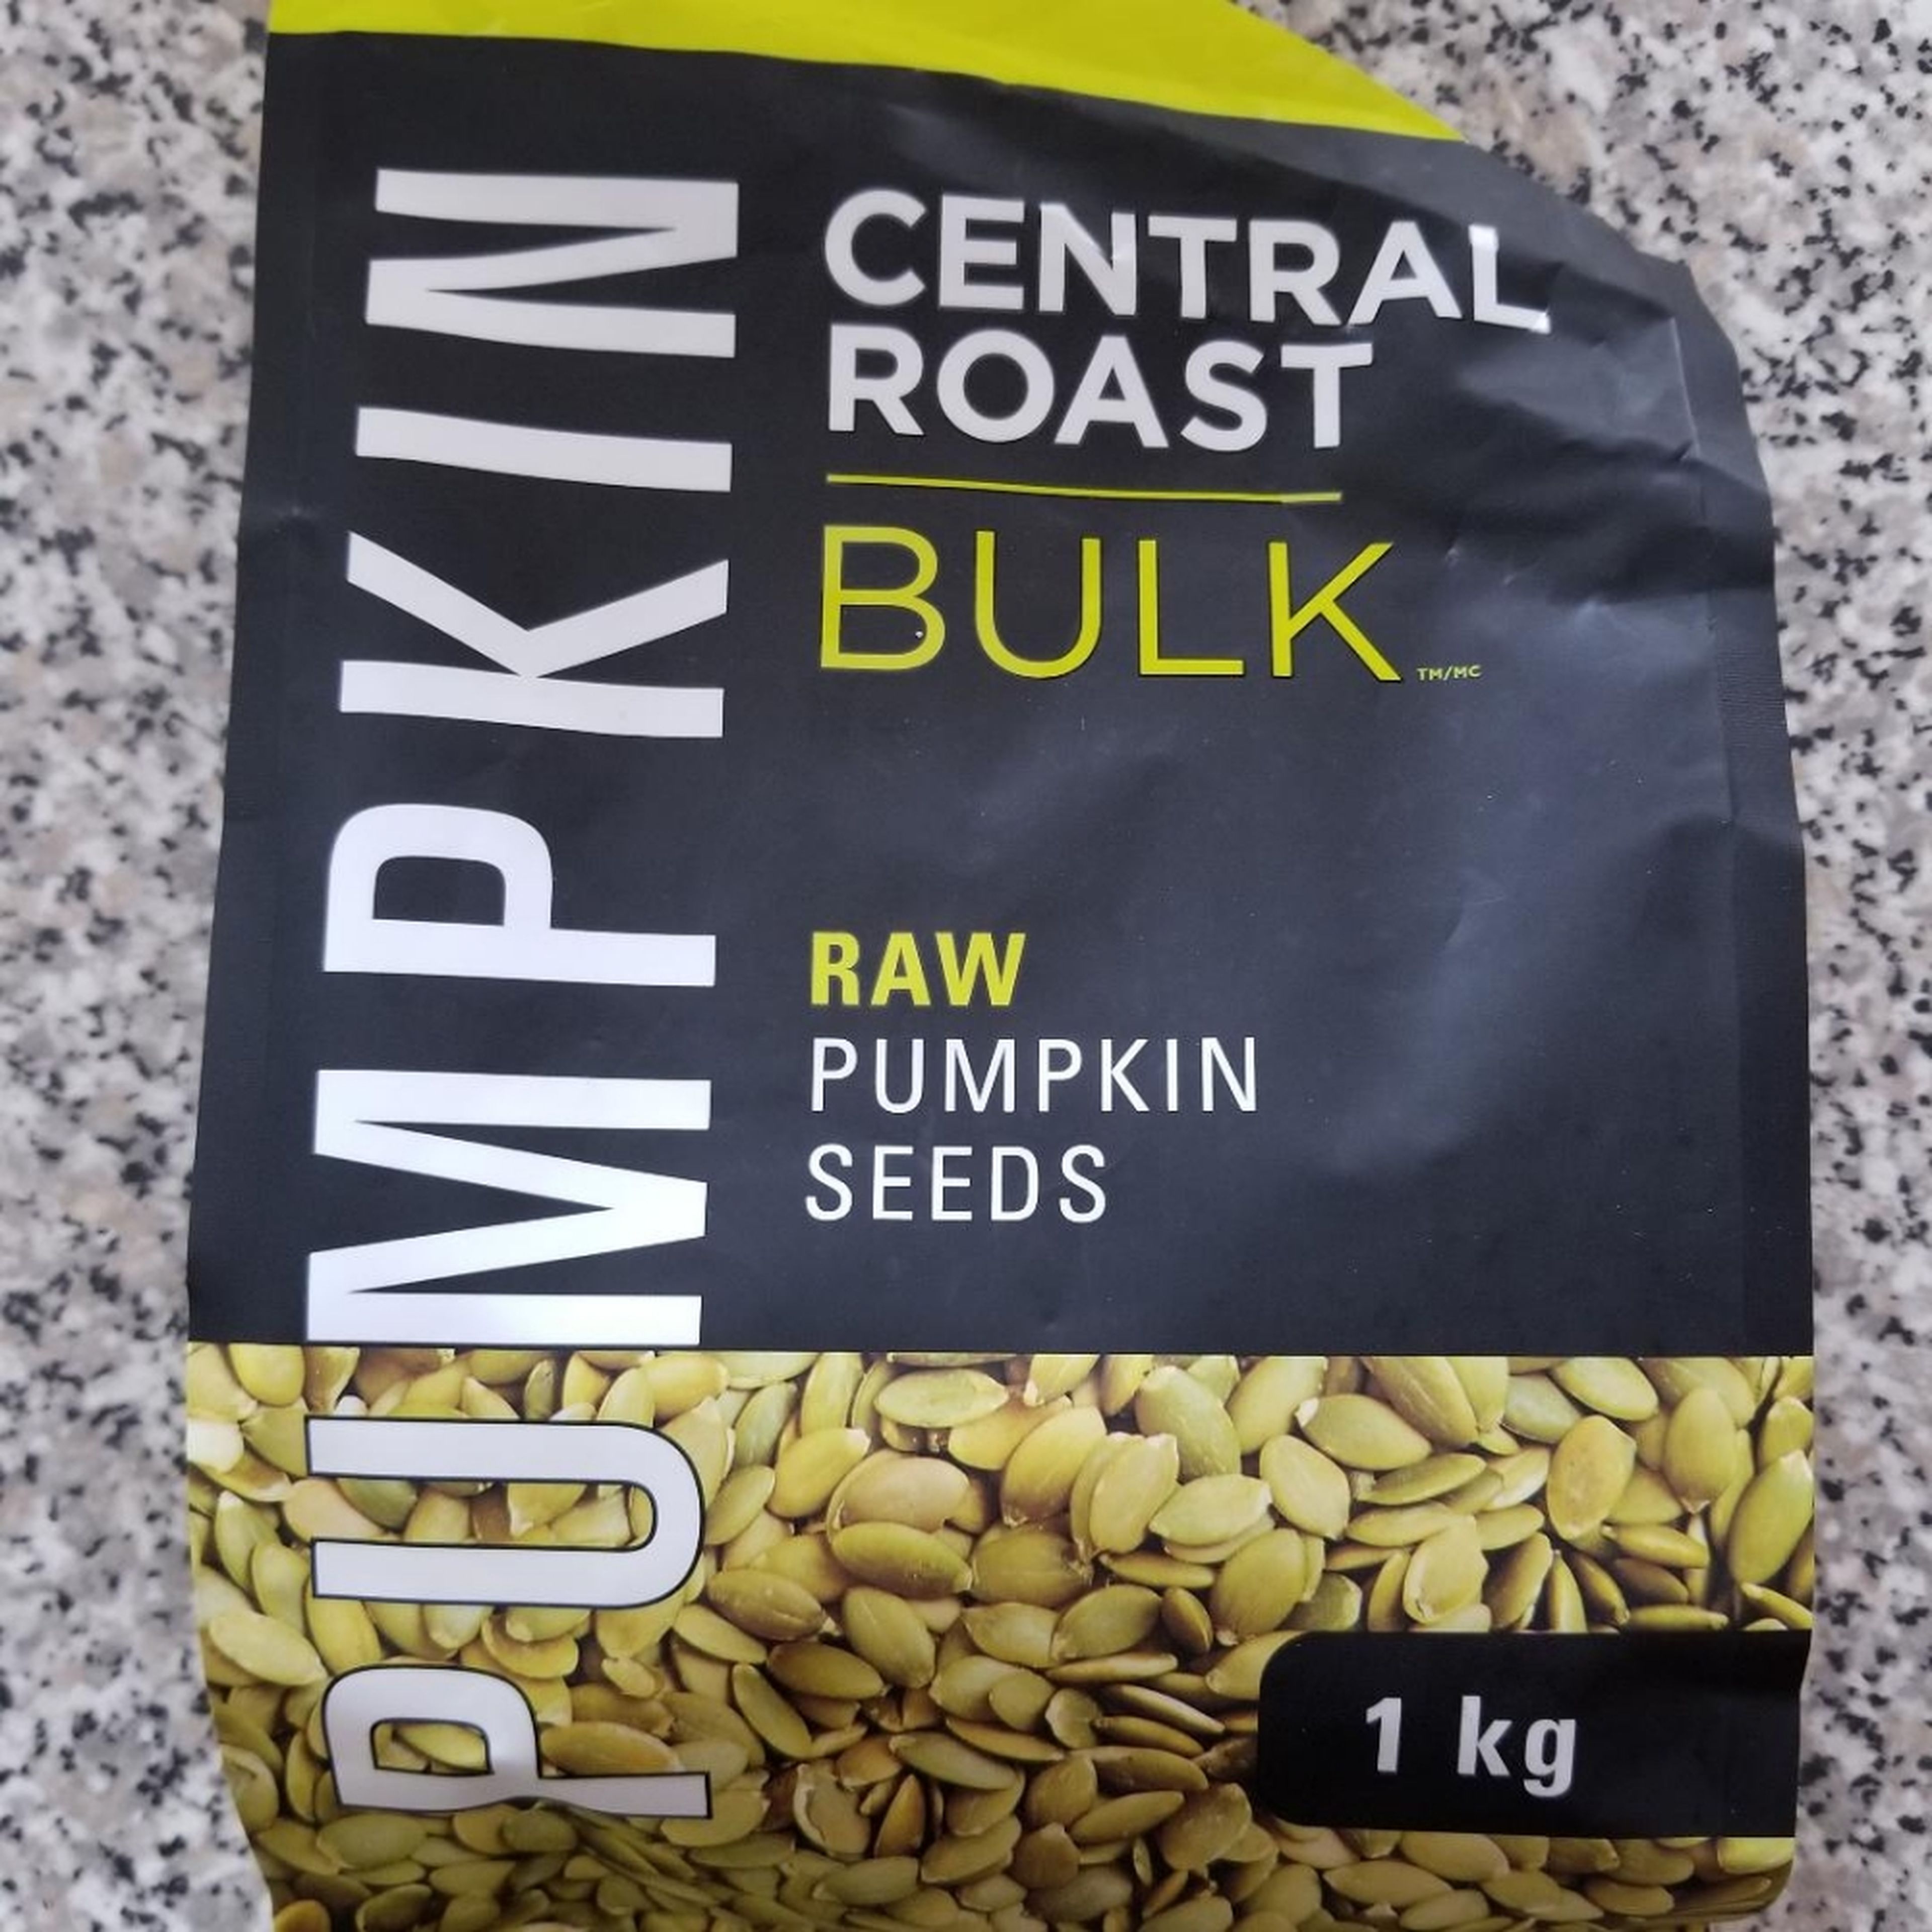 I generally get raw pumpkin seeds and roast them myself. I find the pre-roasted ones are loaded with salt and mixed with unhealthy oils, so best to roast raw ones yourself.